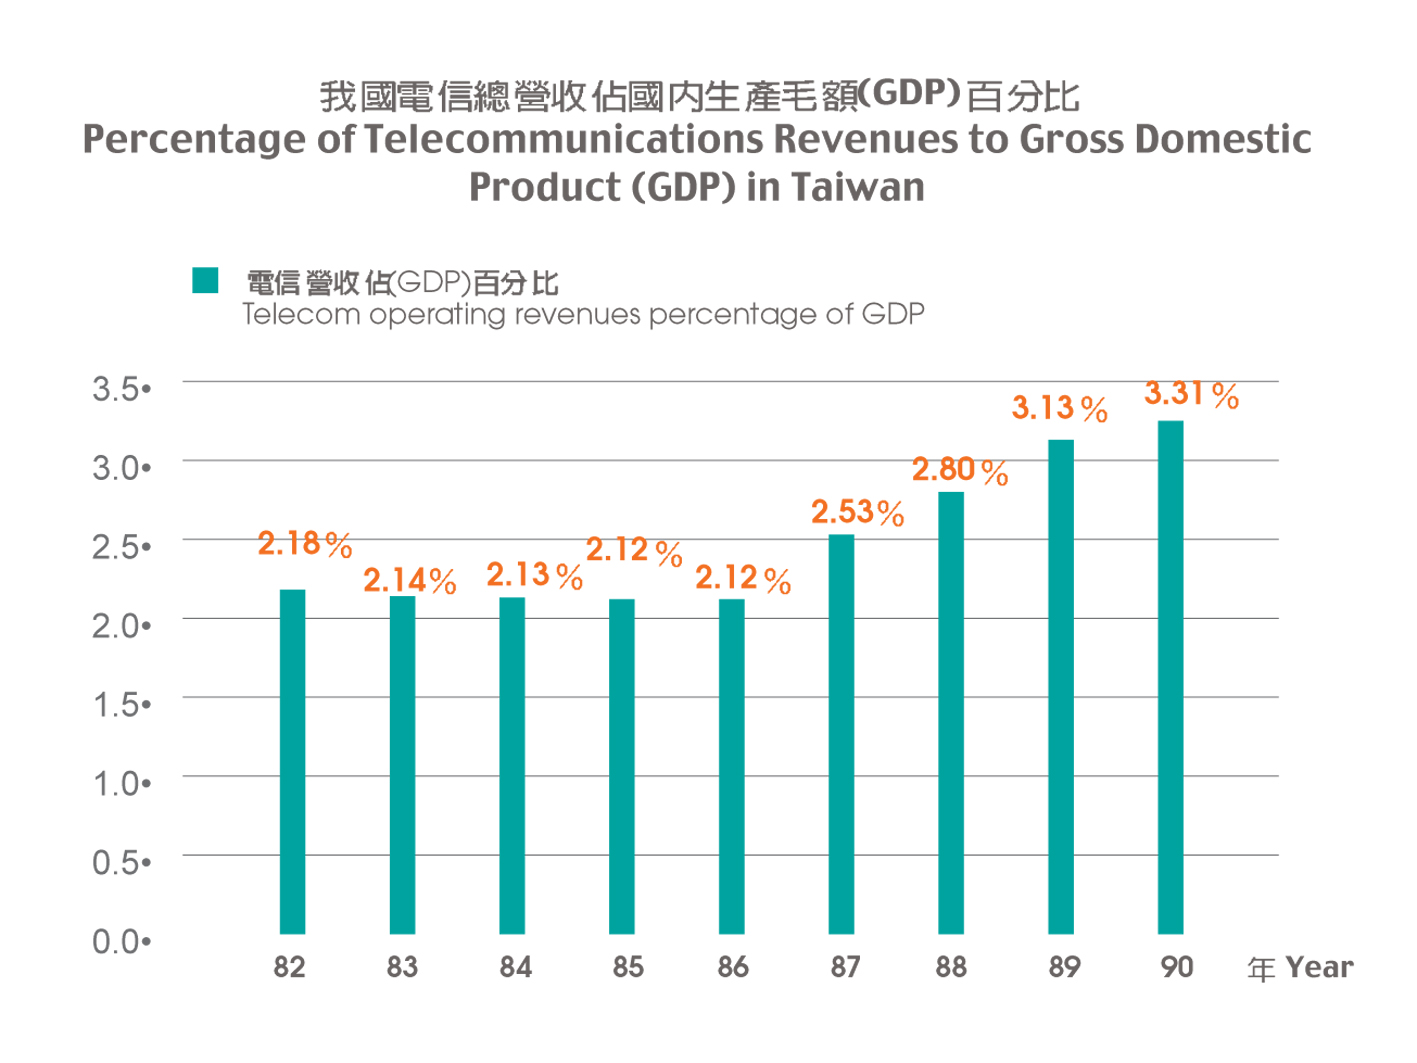 Percentage of Telecommunications Revenues to Gross Domestic Product (GDP) in Taiwan